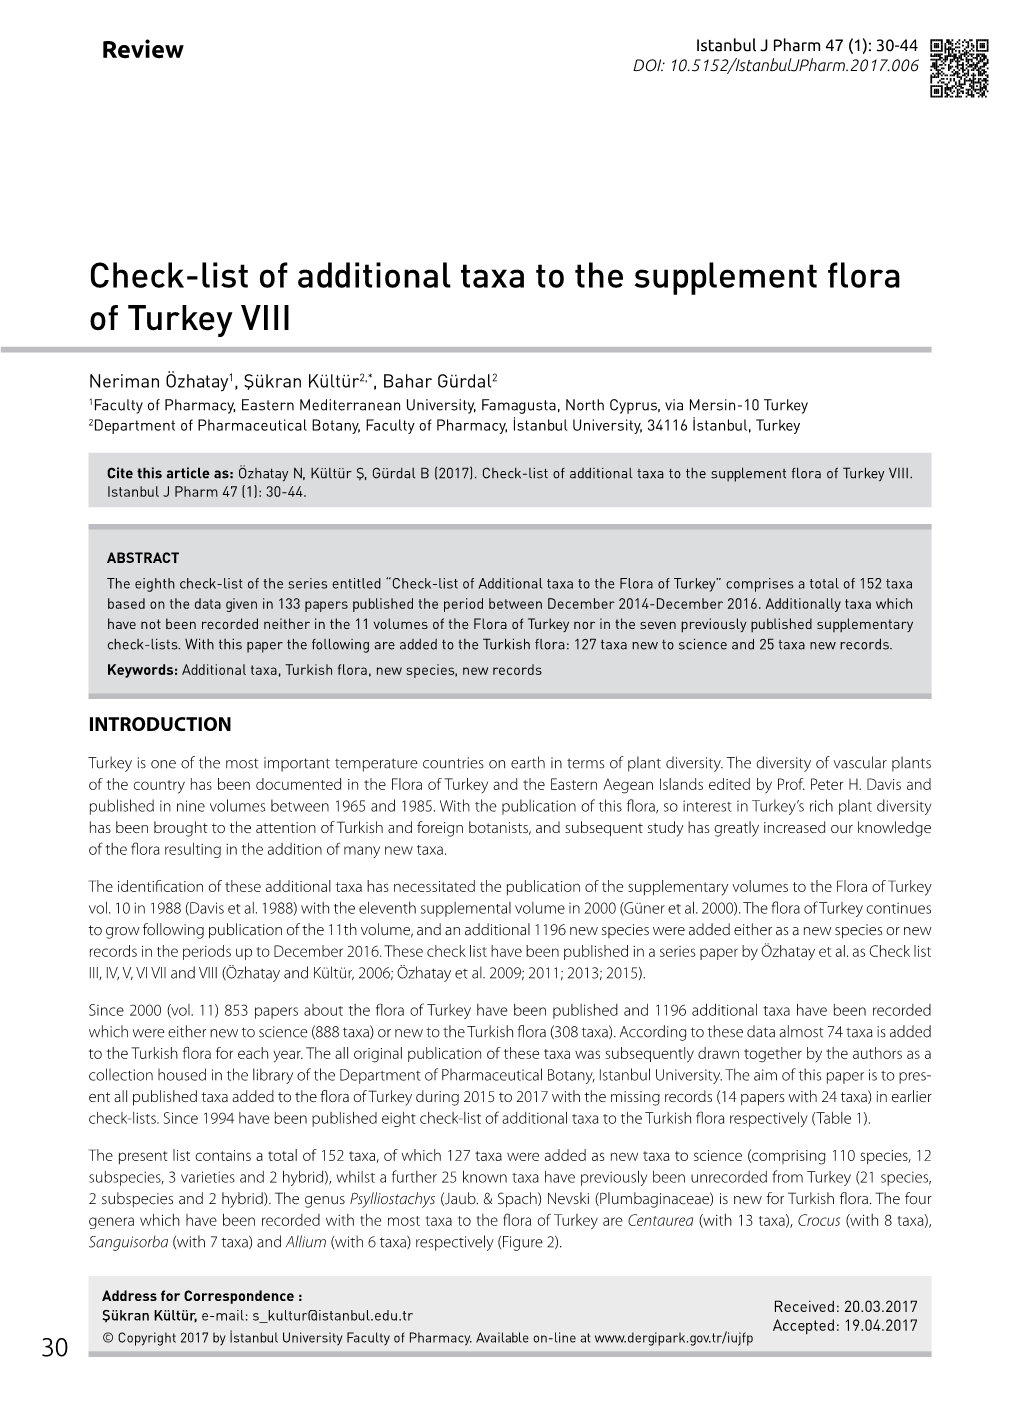 Check-List of Additional Taxa to the Supplement Flora of Turkey VIII